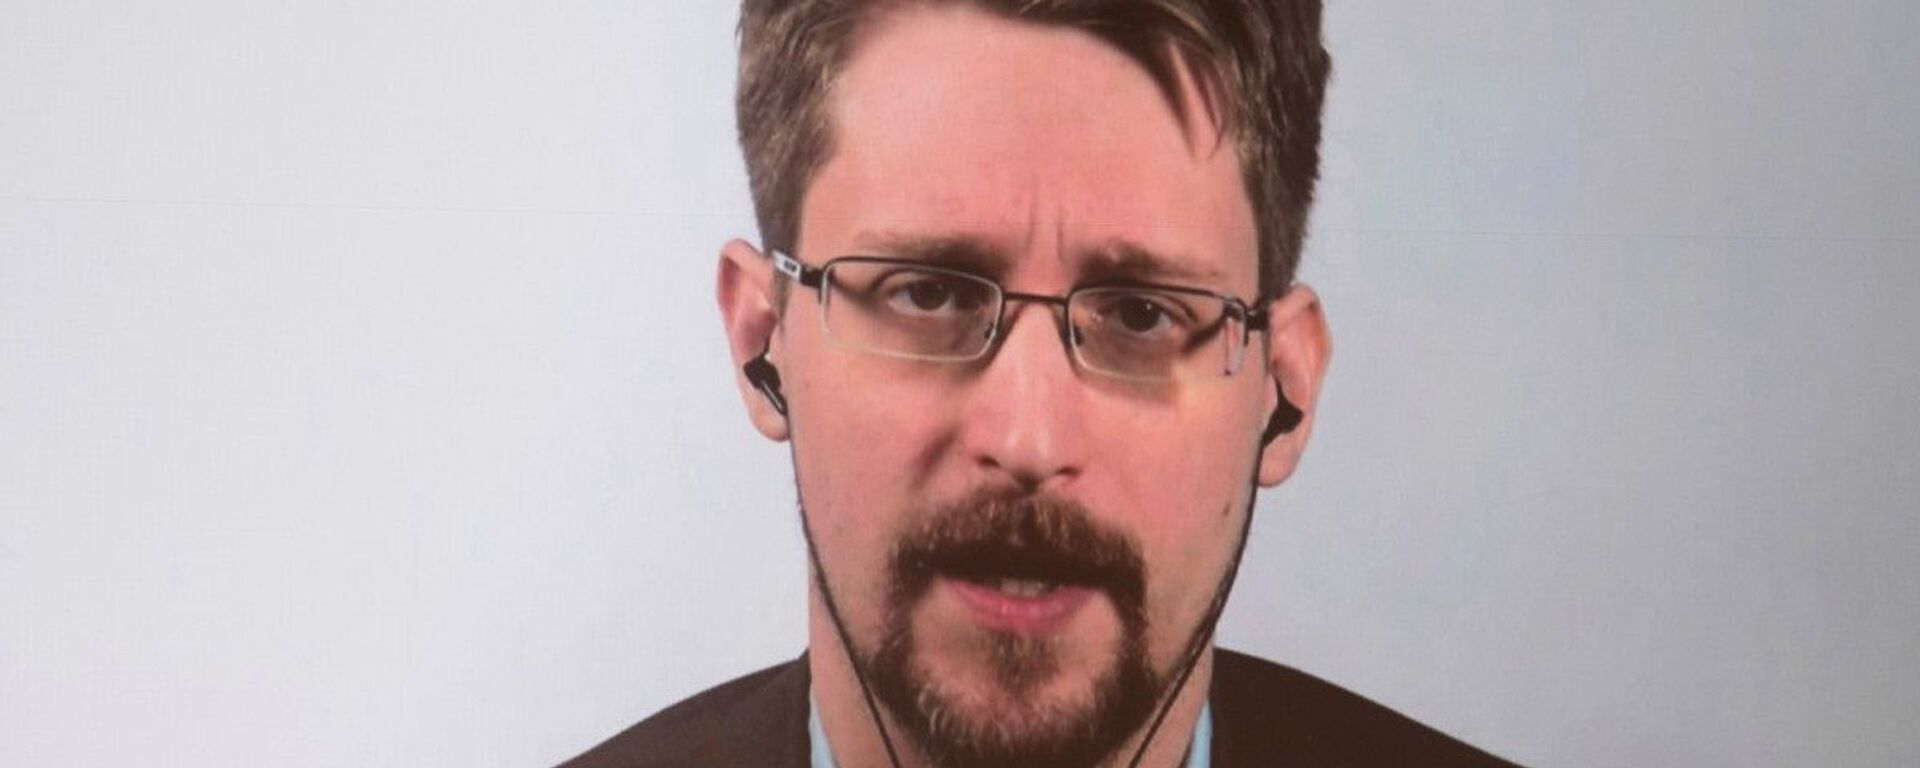 A picture of former US NSA Contractor Edward Snowden posted on Twitter - Sputnik International, 1920, 21.01.2022